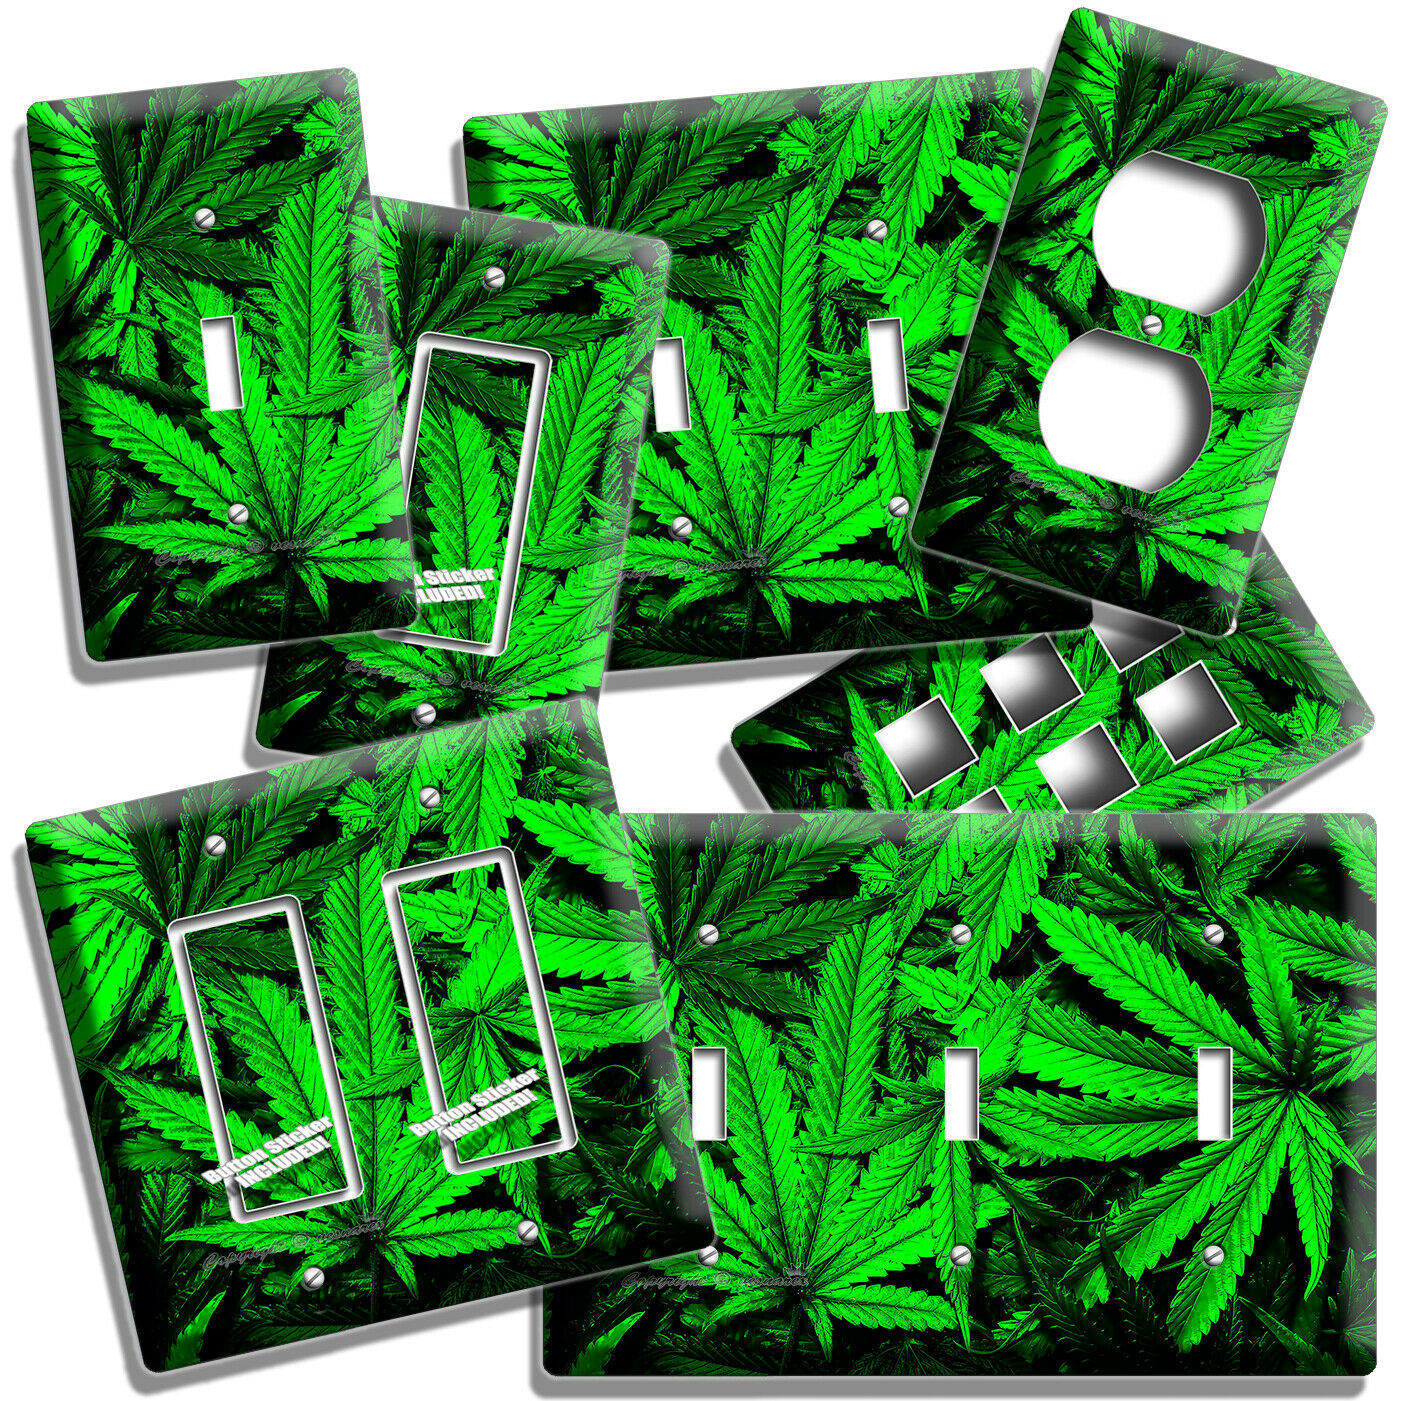 GREEN CANNABIS MARIJUANA LEAF LIGHT SWITCH OUTLET WALL PLATE MAN CAVE ROOM DECOR - $10.99